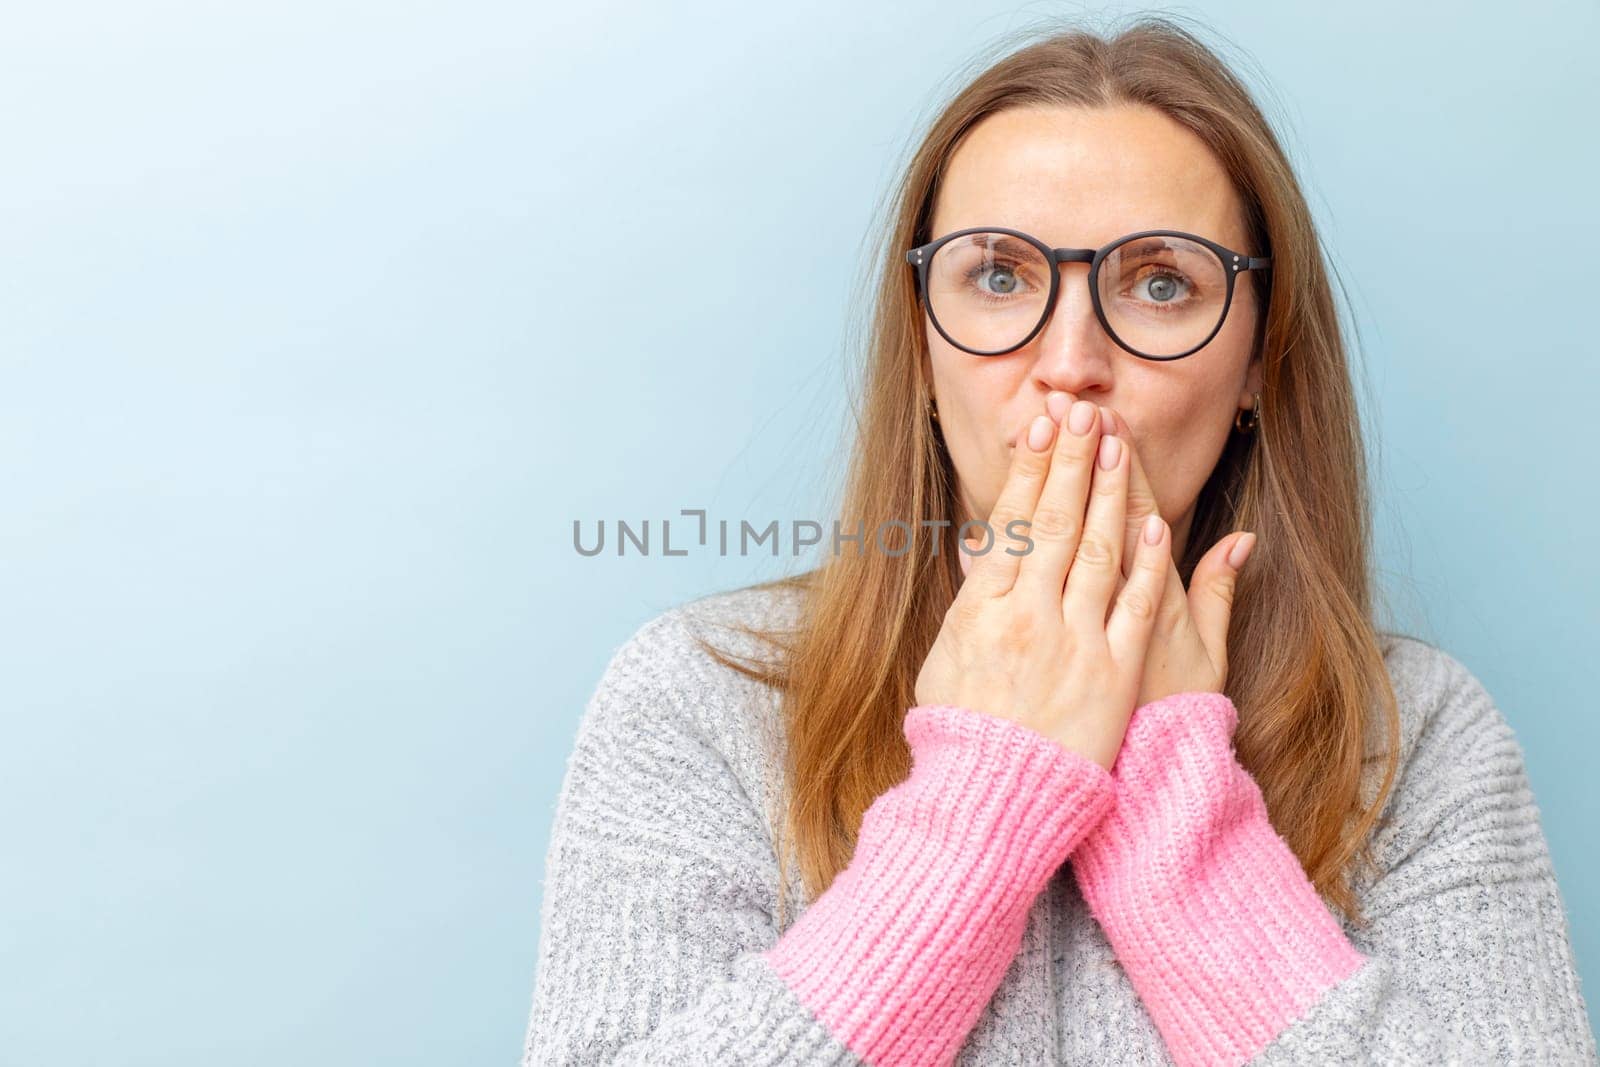 Shocked young woman in eyeglasses covering her mouth with her hands and looking at camera on blue background.